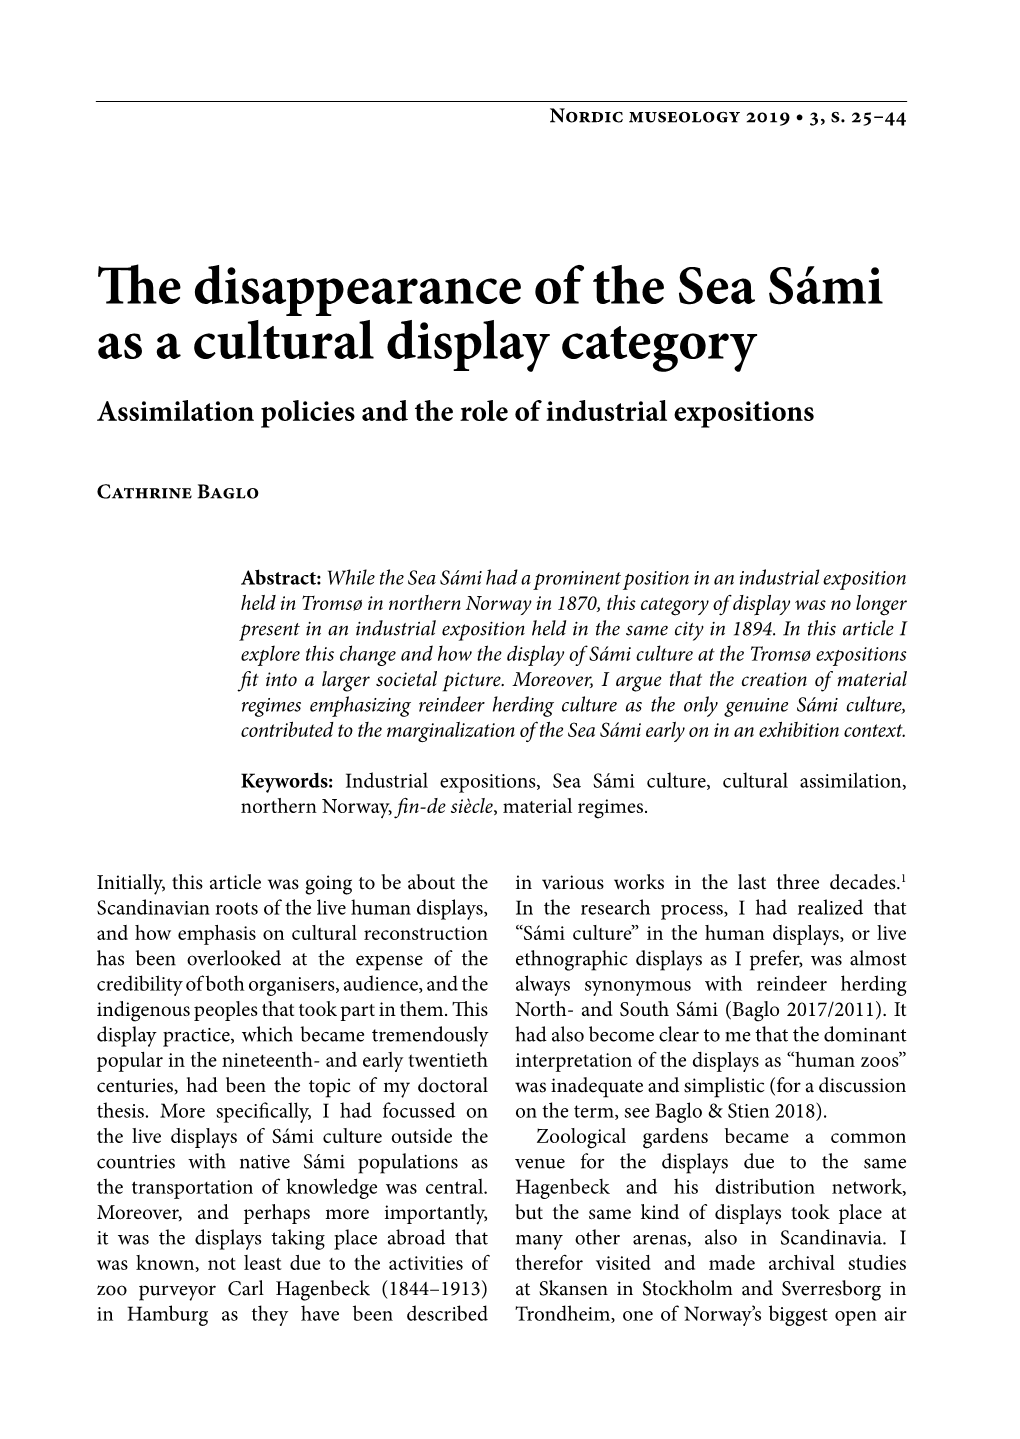 The Disappearance of the Sea Sámi As a Cultural Display Category Assimilation Policies and the Role of Industrial Expositions